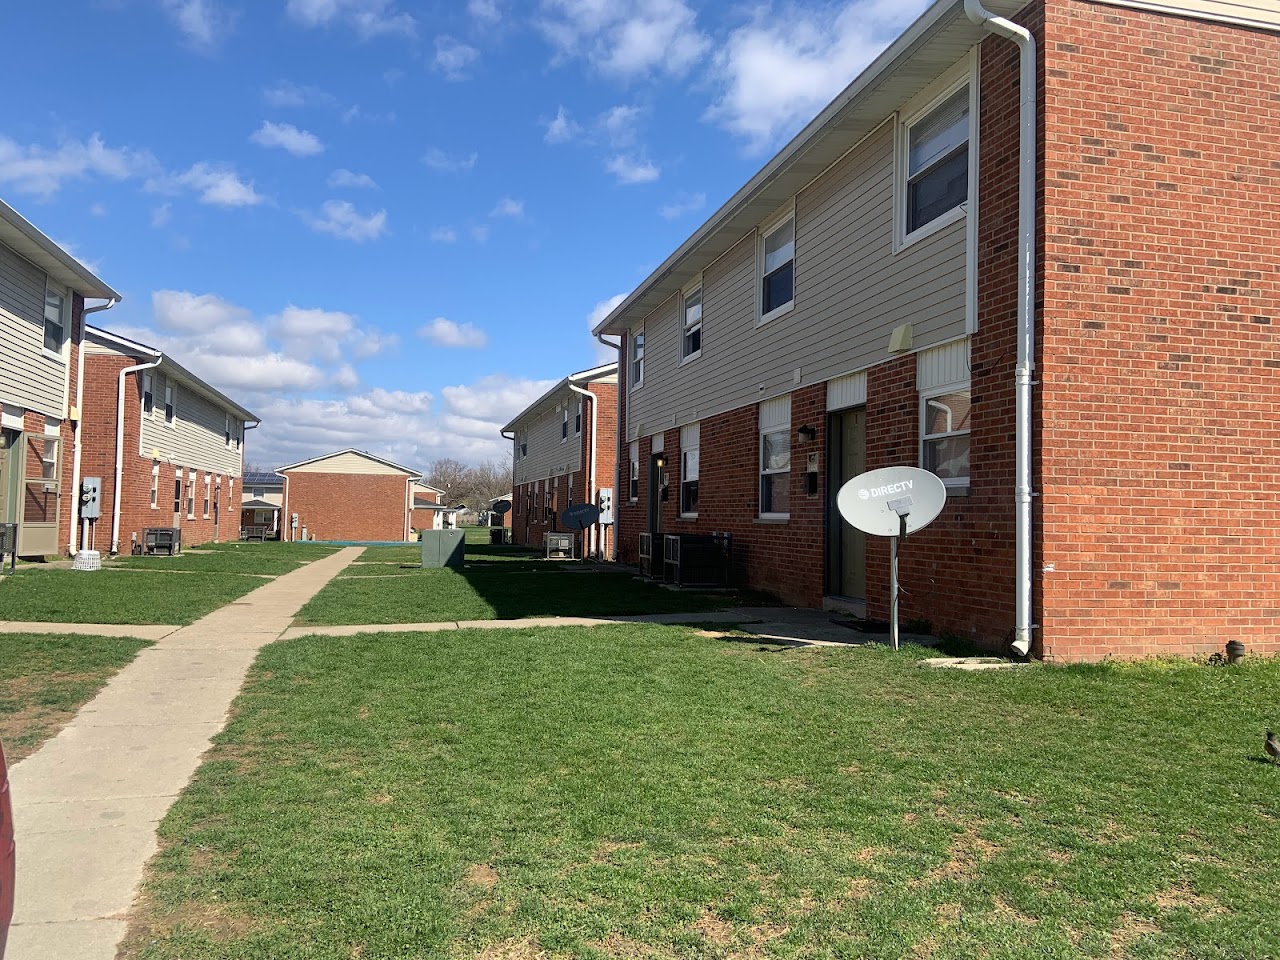 Photo of LAURELWOOD & ROWNEY. Affordable housing located at 3340 TEAKWOOD DR INDIANAPOLIS, IN 46227